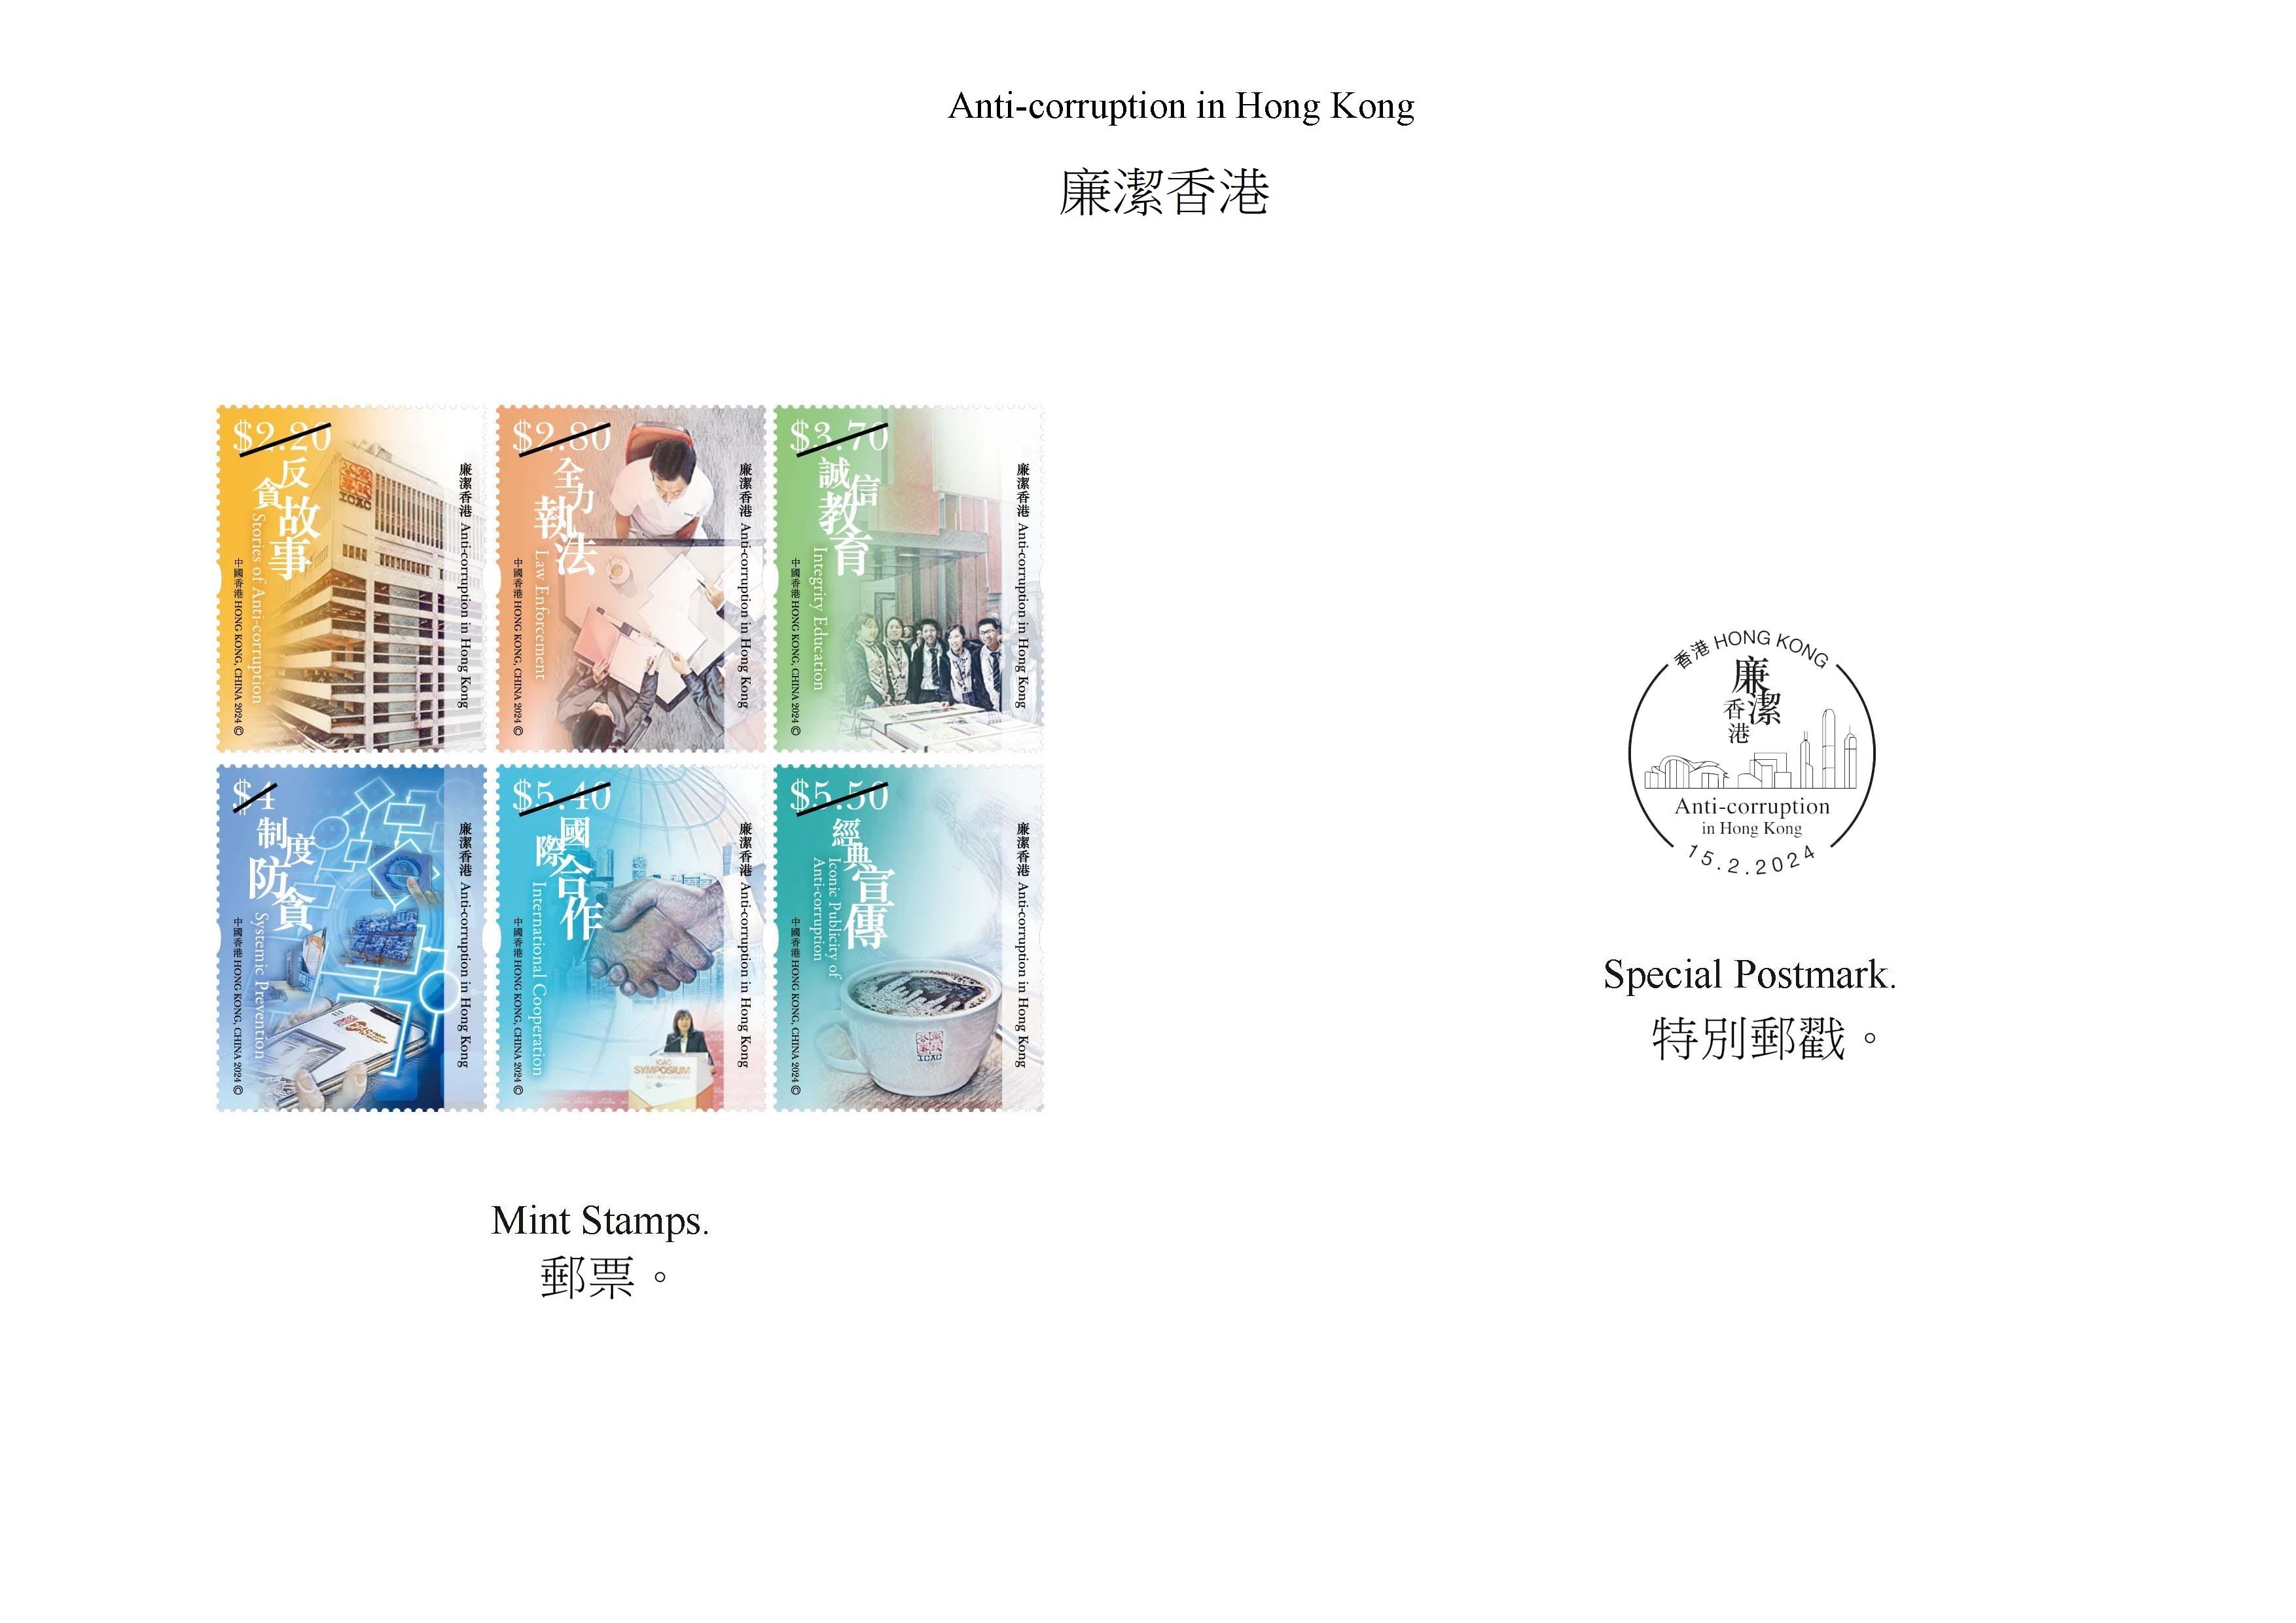 Hongkong Post will launch a special stamp issue and associated philatelic products on the theme of “Anti-corruption in Hong Kong” on February 15 (Thursday). Photos show the mint stamps and the special postmark.


